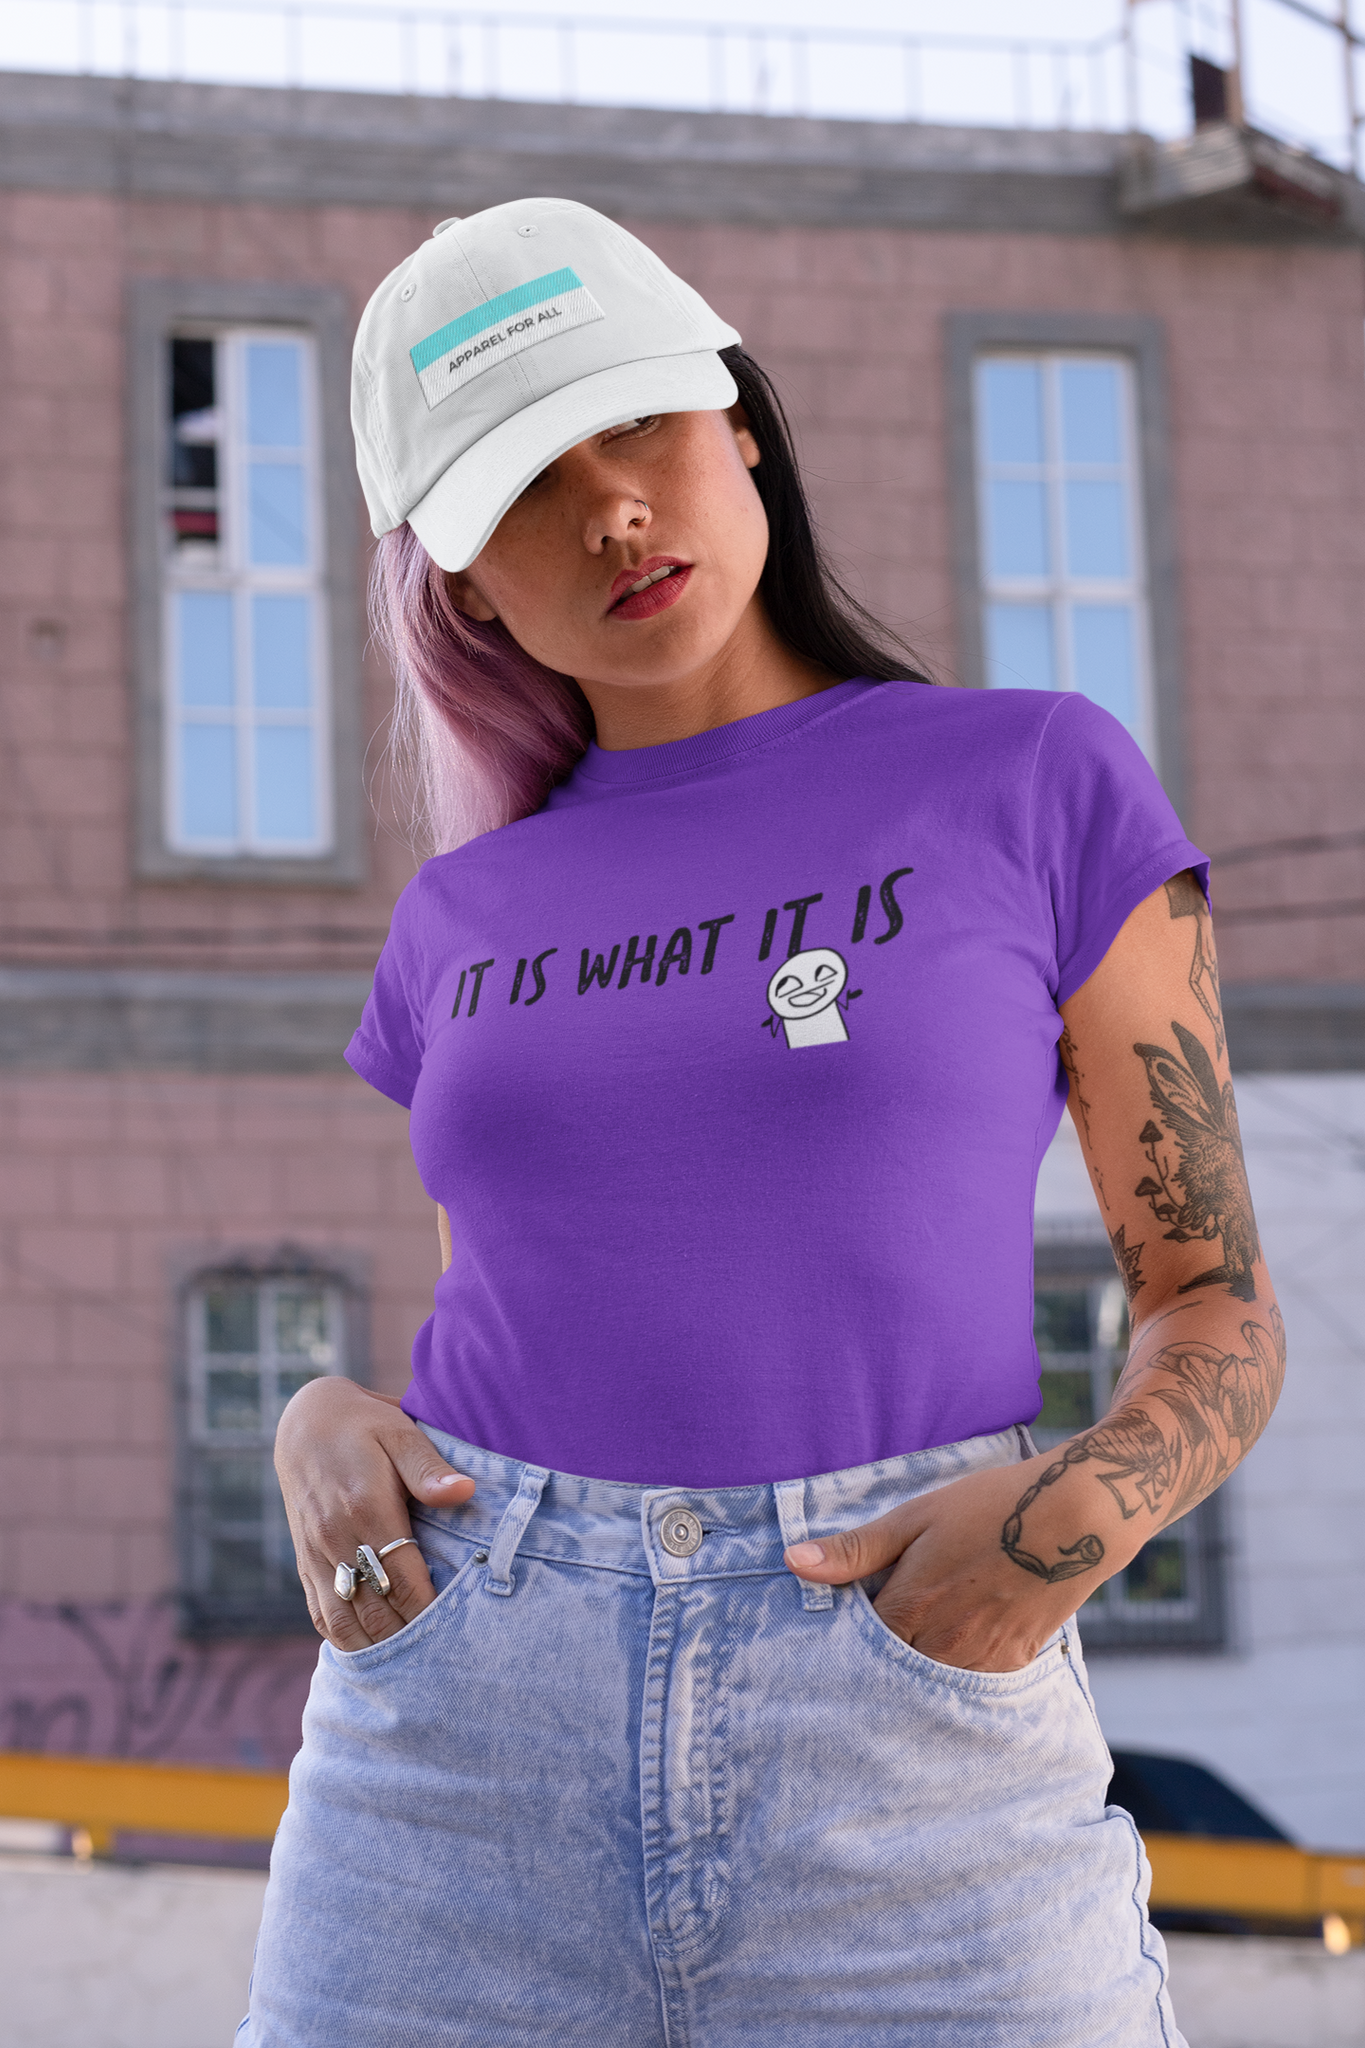 "It is what it is" Adult T-shirt